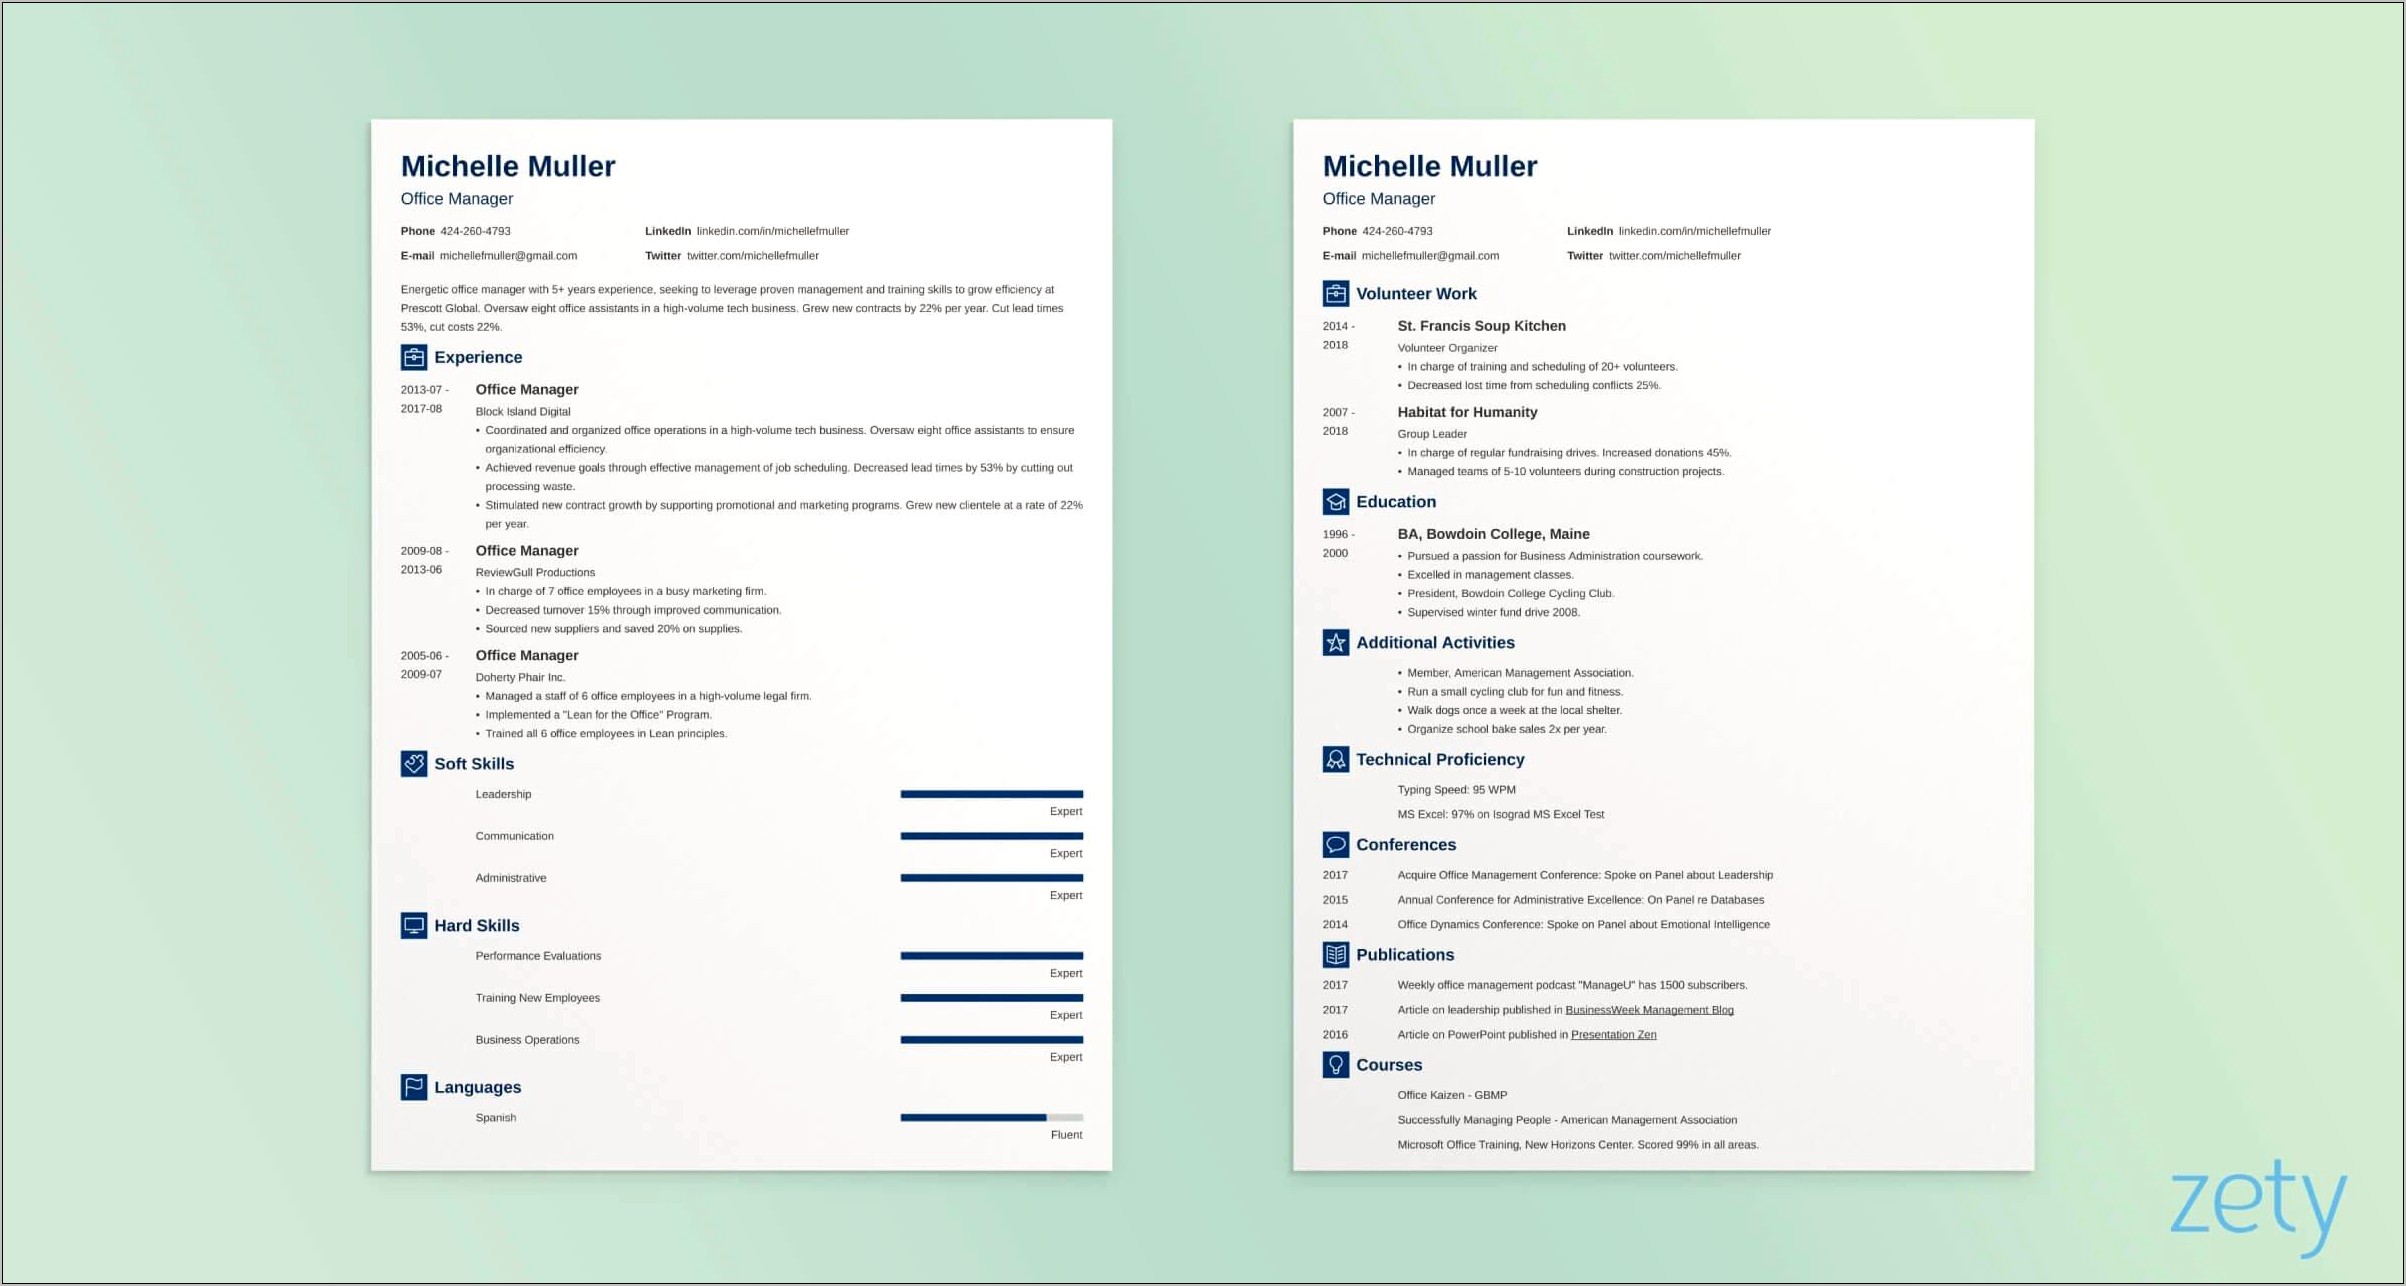 Example Of Heading On Page 2 Resume